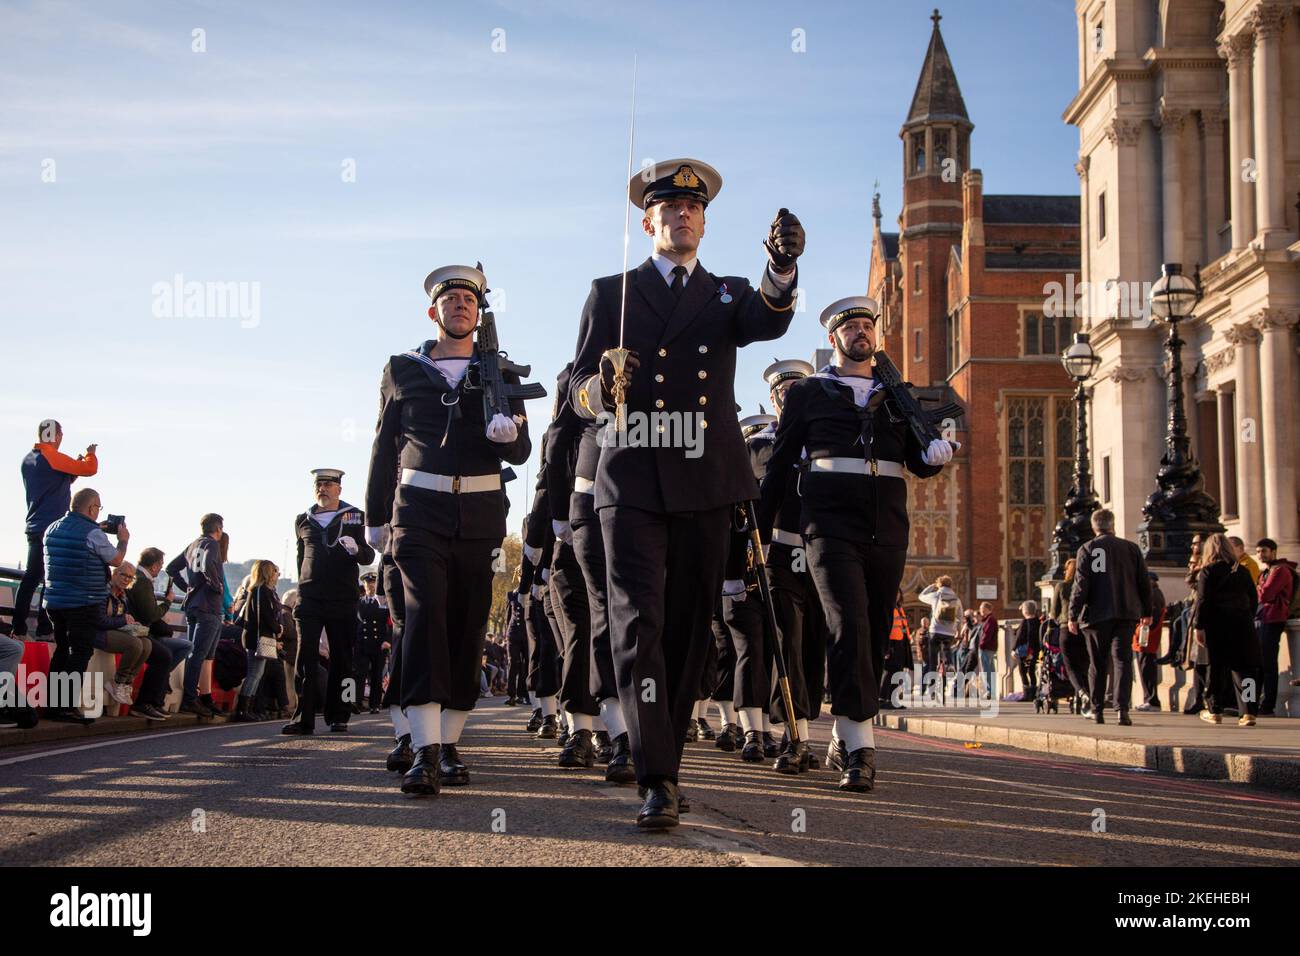 London, UK. 12th November 2022. Royal Marines take part in the Lord Mayor’s Show in honor of the 694th Lord Mayor of the City of London, Alderman Nicholas Lyons. Credit: Kiki Streitberger/Alamy Live News Stock Photo